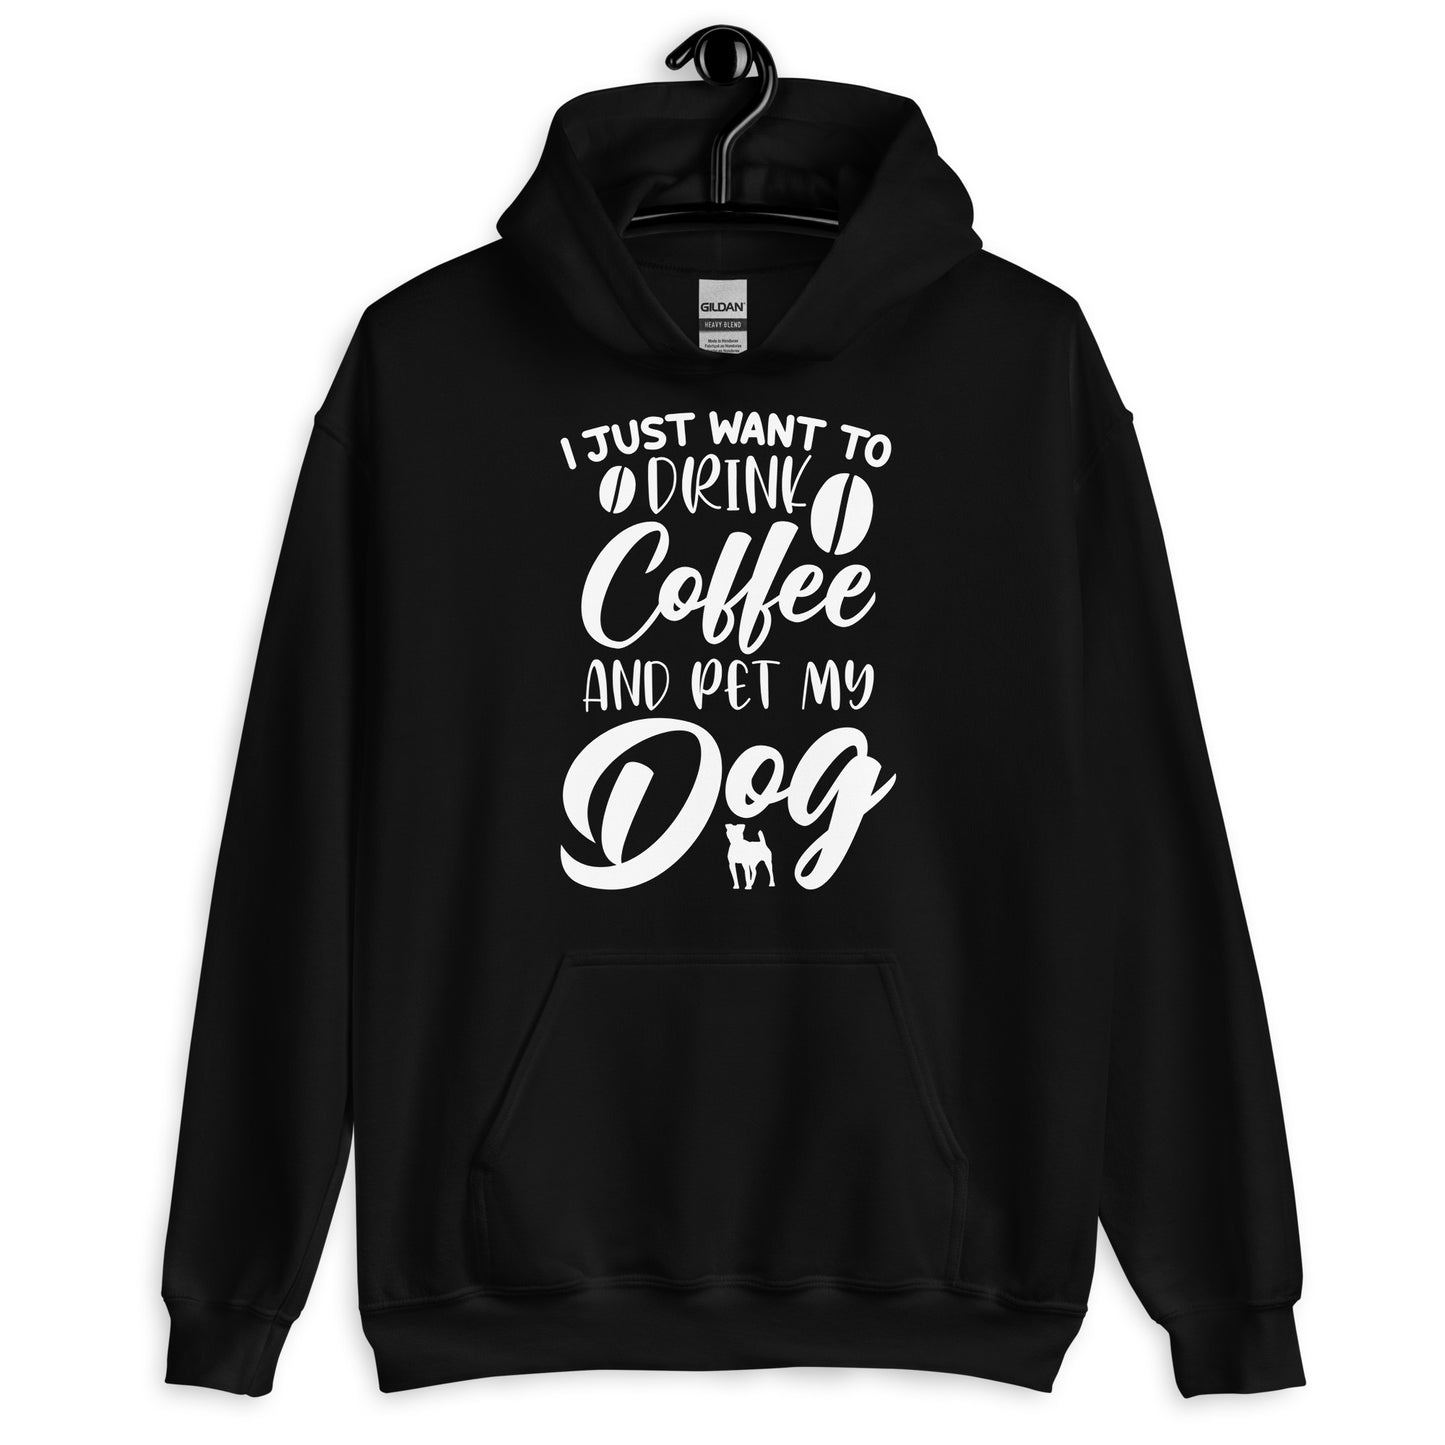 I Just Want to Drink Coffee and Pet My Dog Hoodie